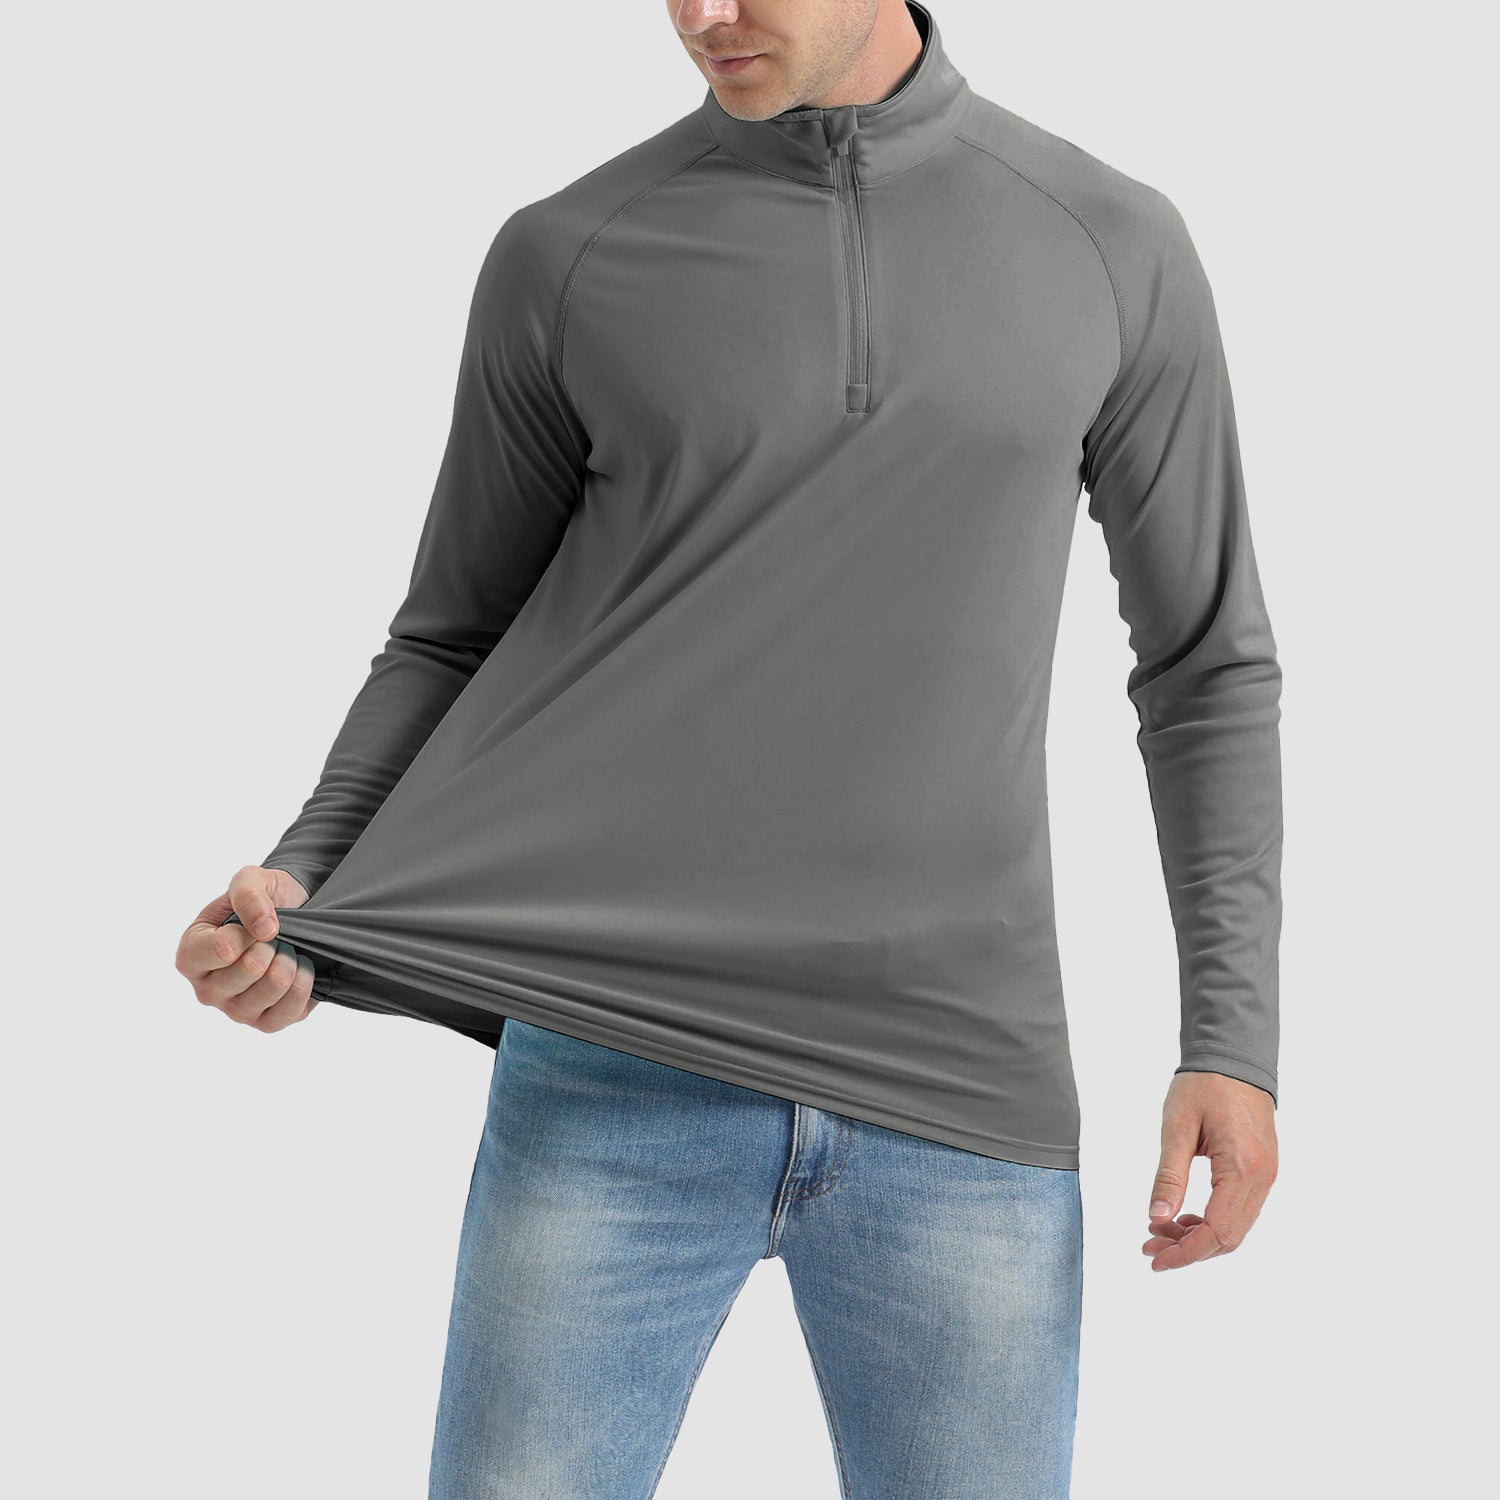 Men's Long Sleeve Shirt UPF 50 Quick Dry for Outdoor Sports, Blue Grey / S